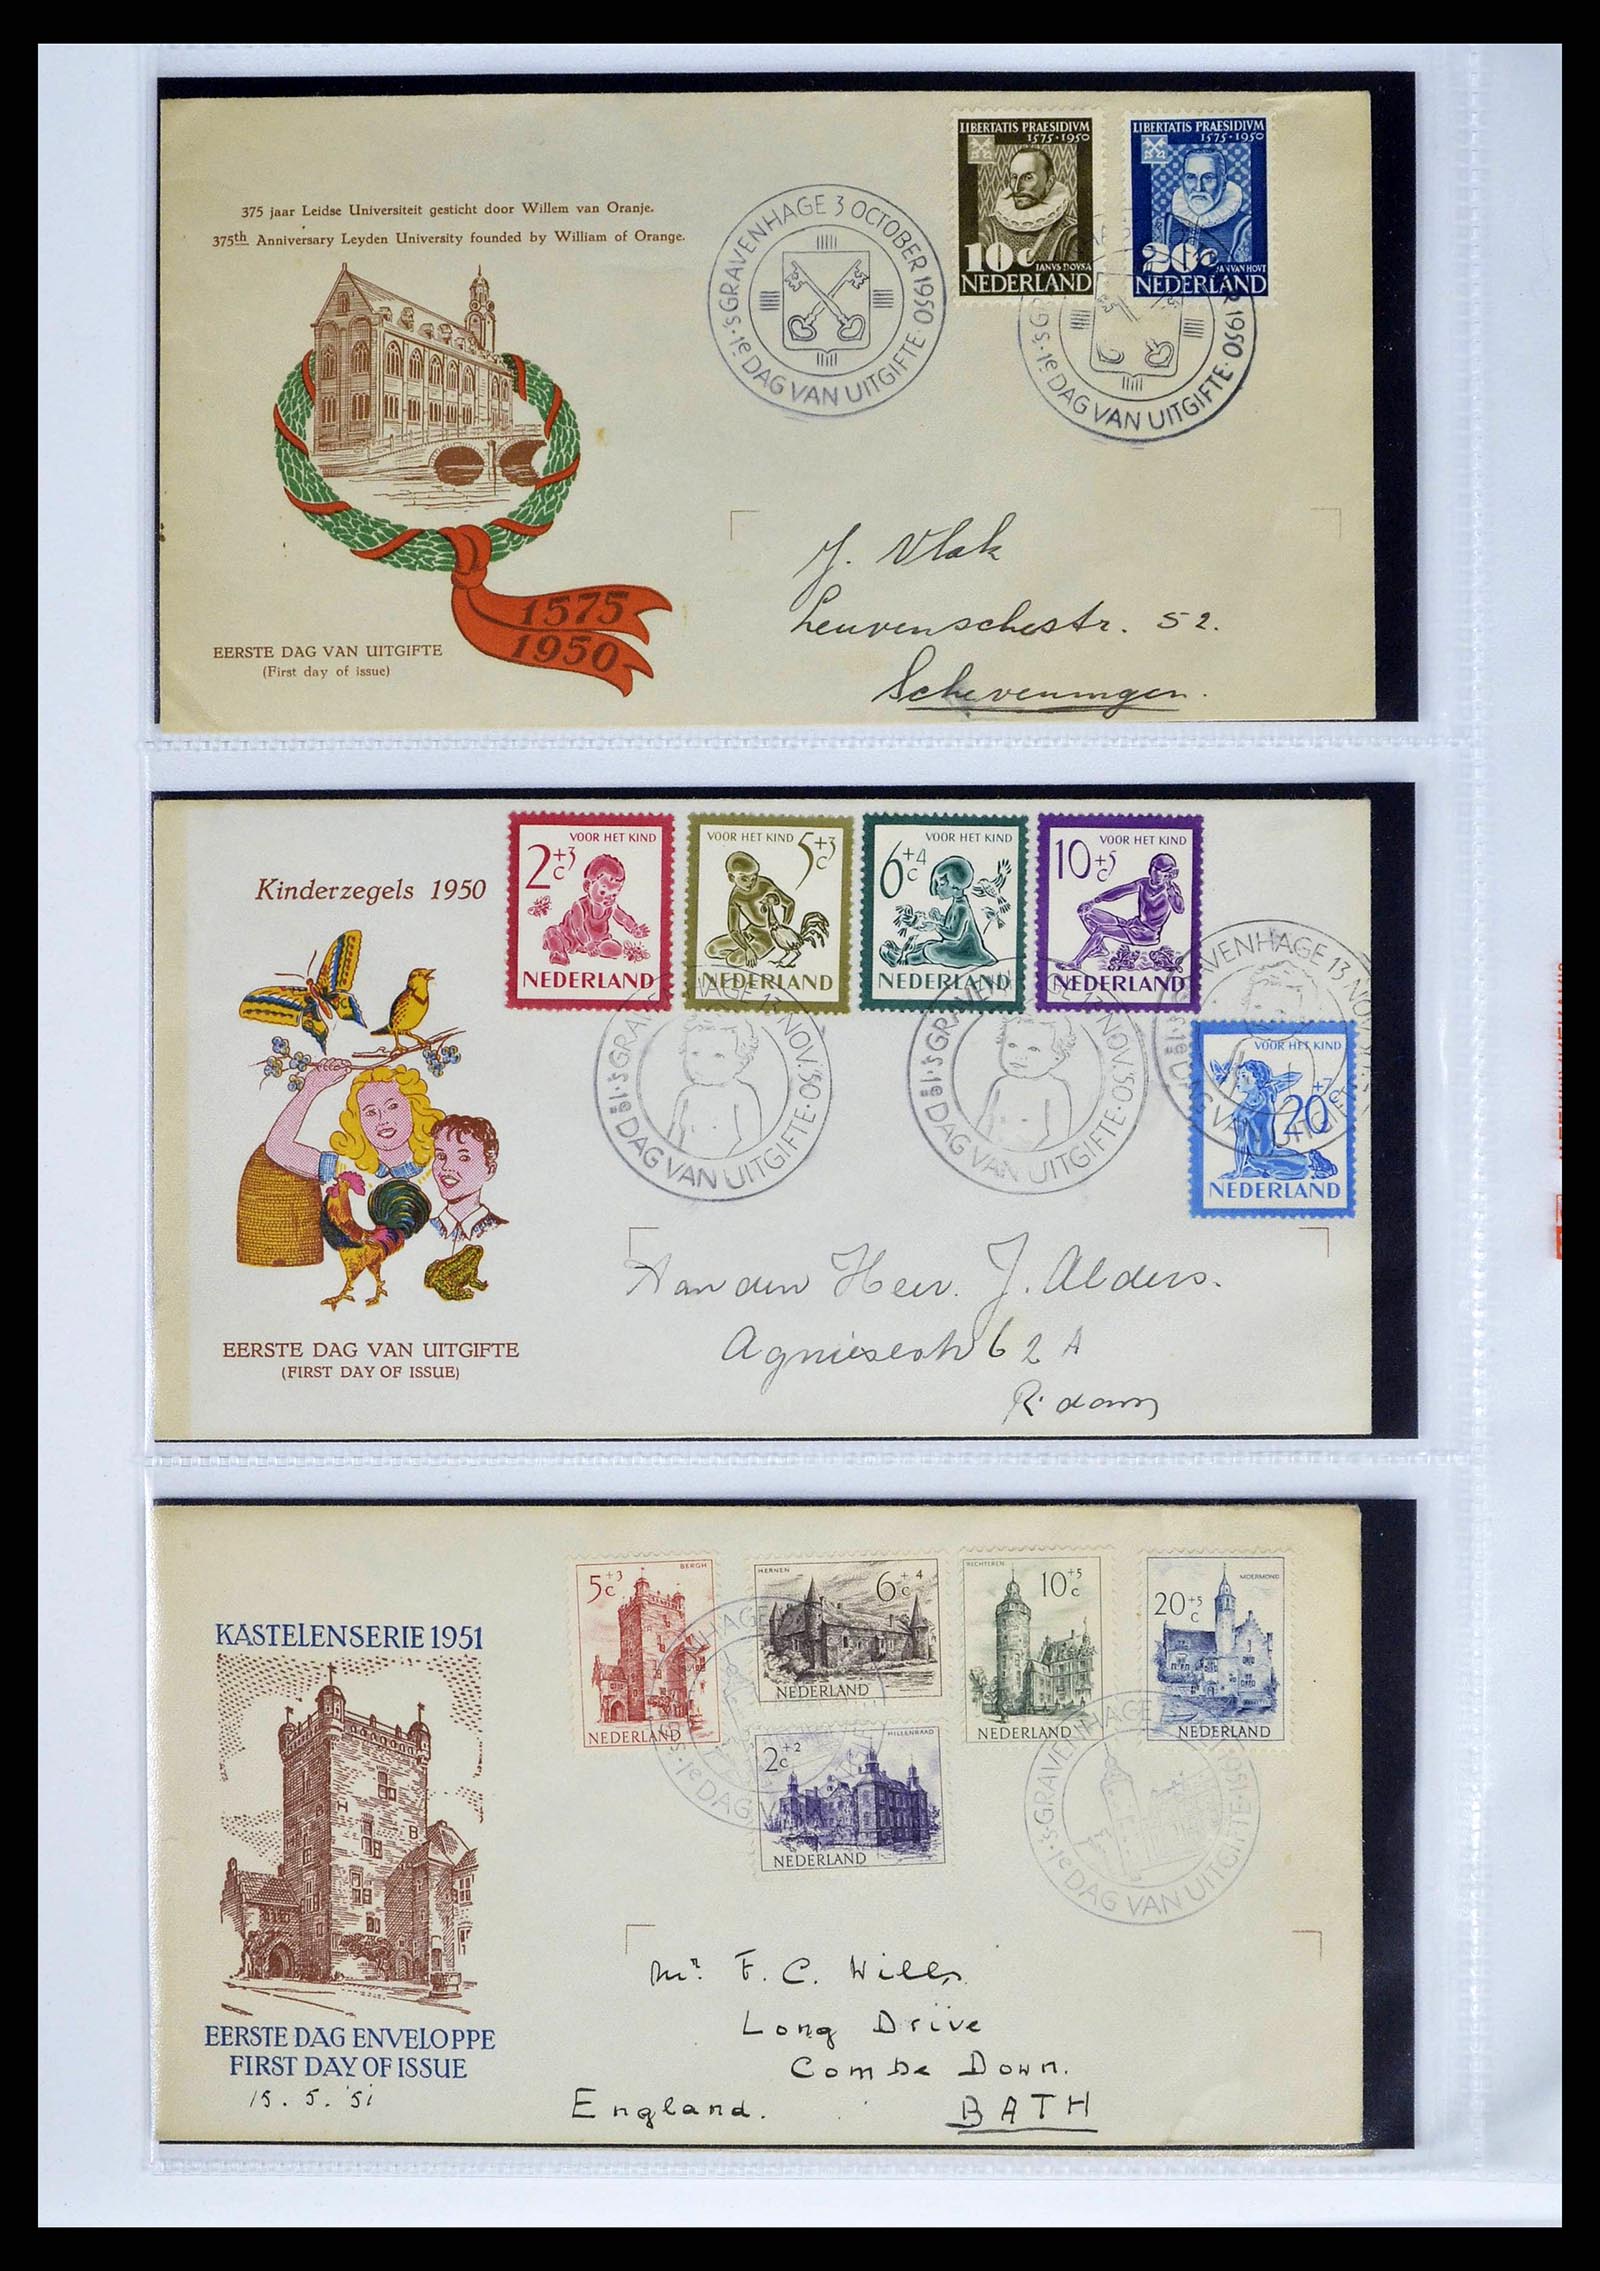 37821 0003 - Stamp collection 37821 Netherlands FDC's 1950-2012.